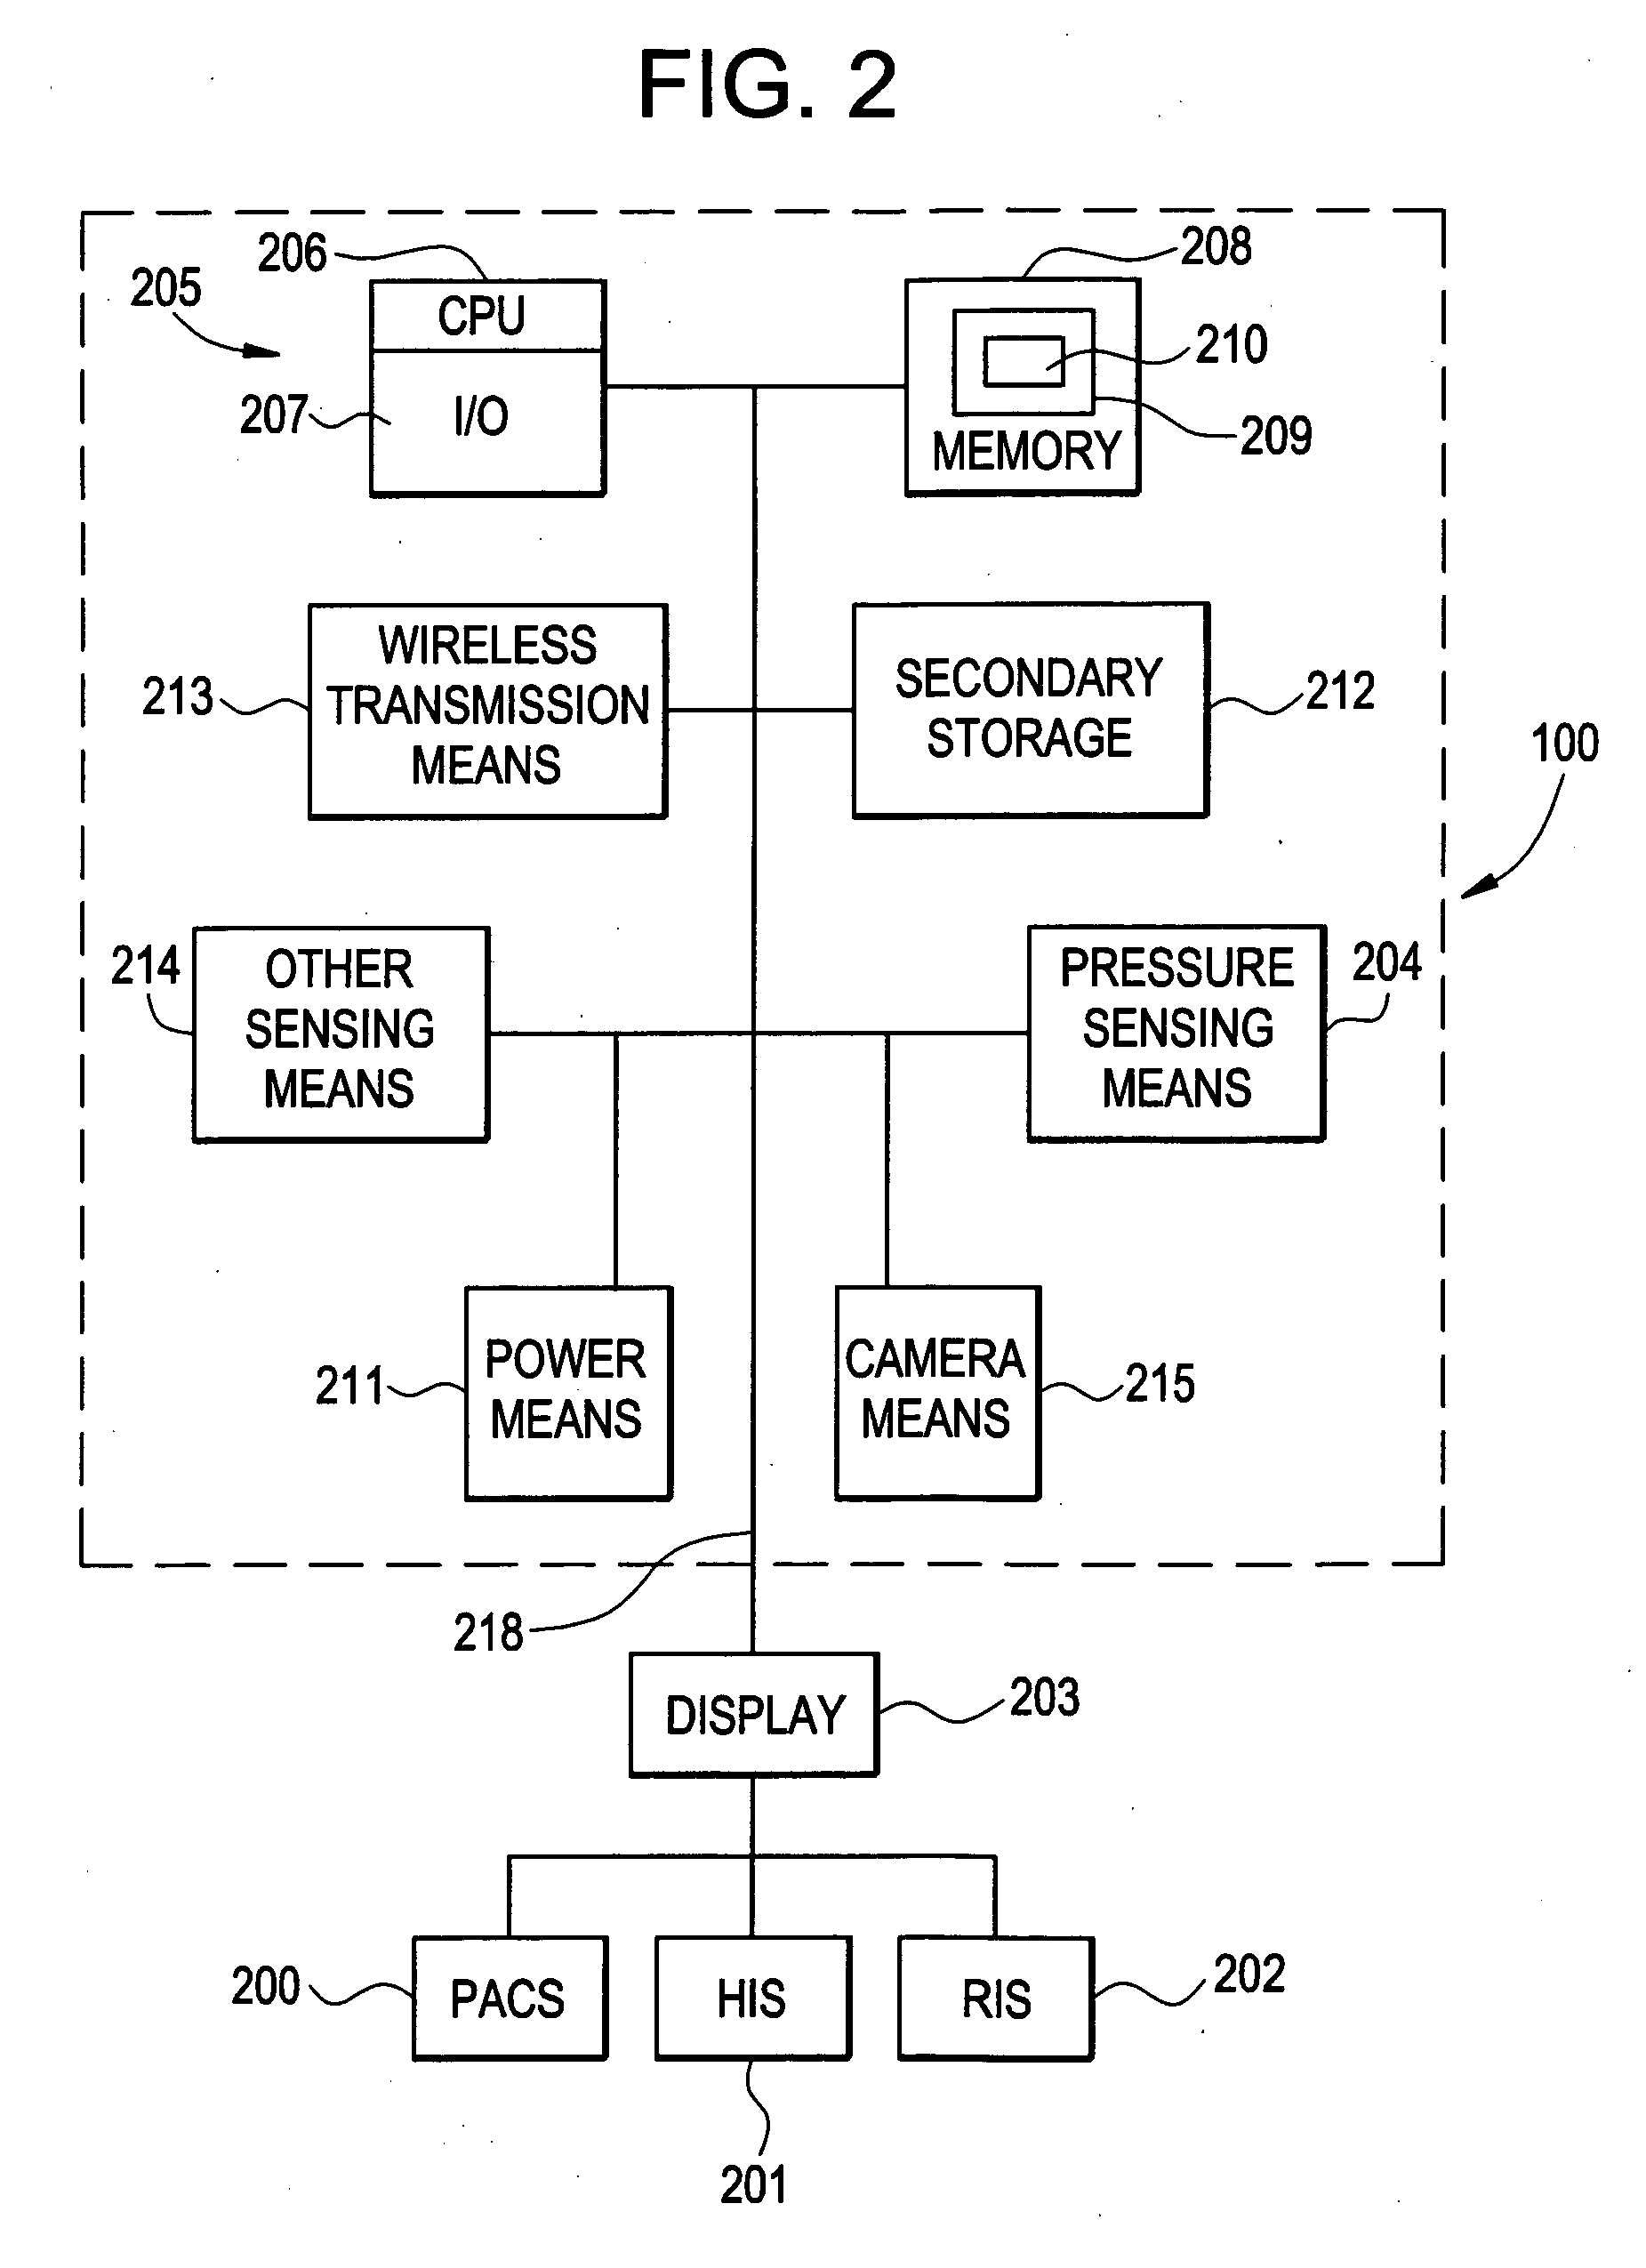 Multi-functional navigational device and method